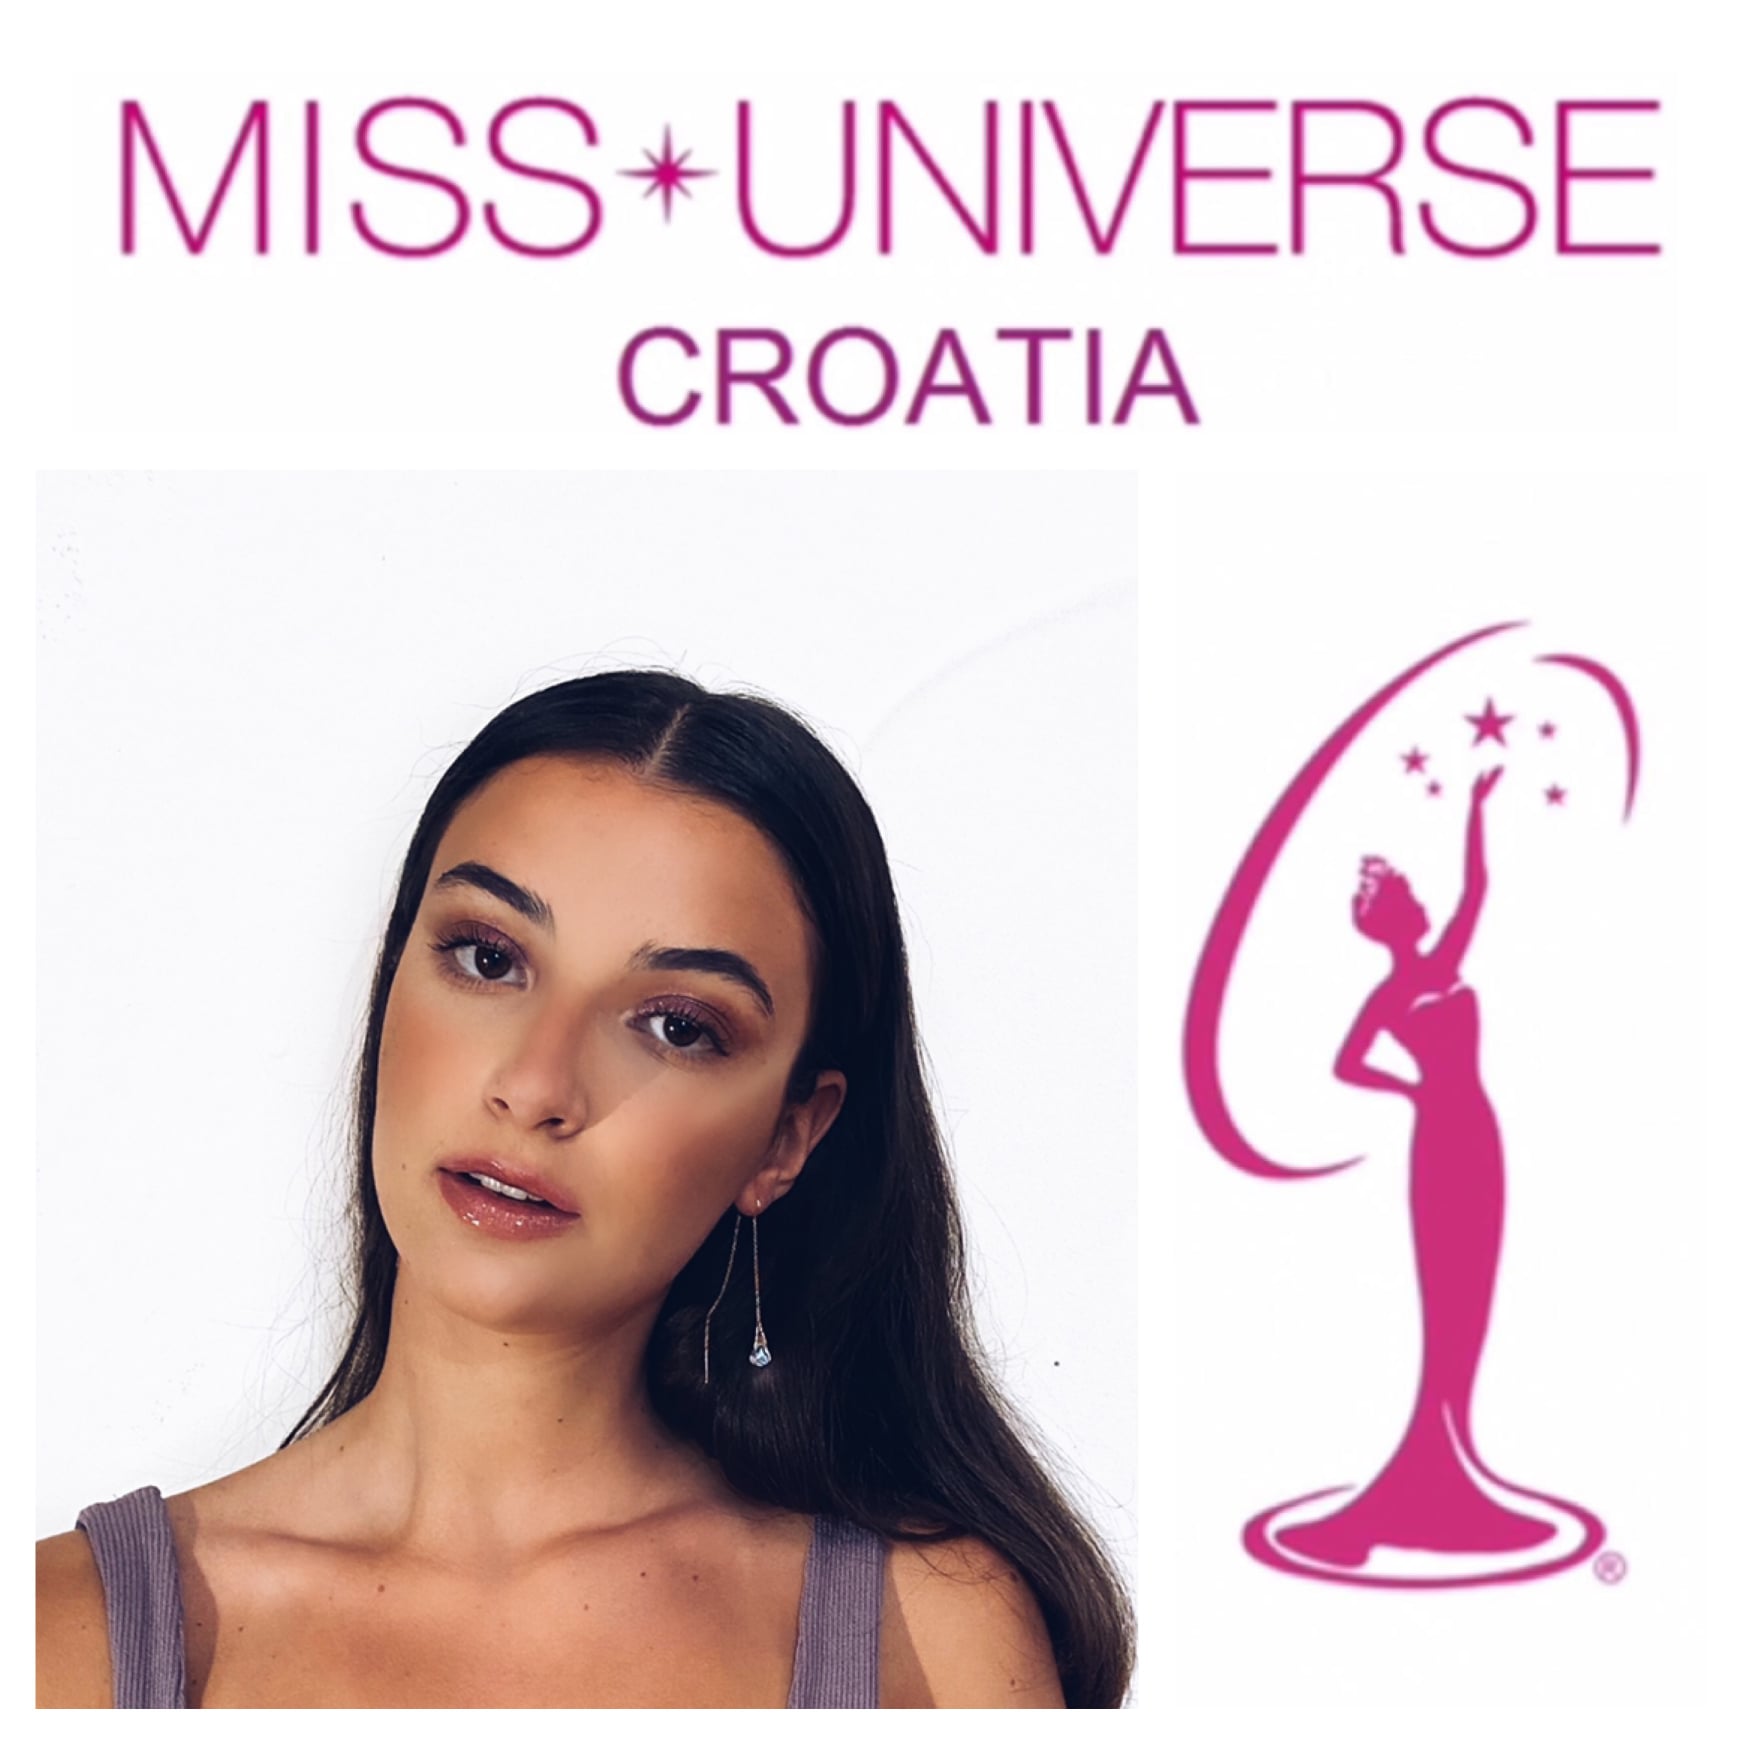 Croatia set to crown new Miss Universe - the finalists 